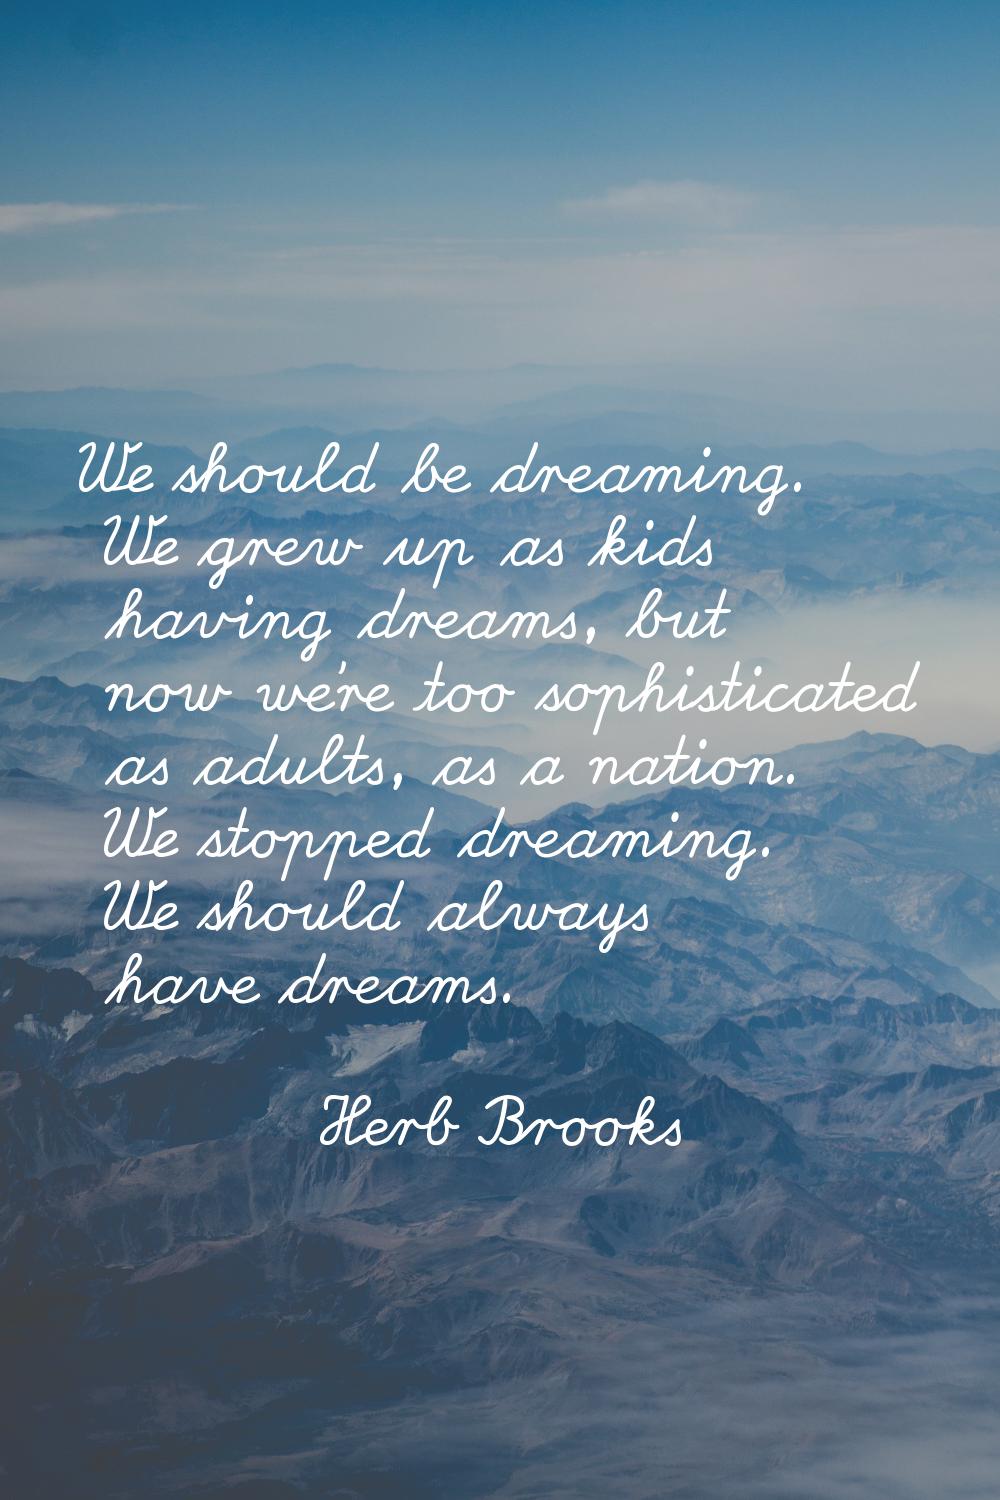 We should be dreaming. We grew up as kids having dreams, but now we're too sophisticated as adults,